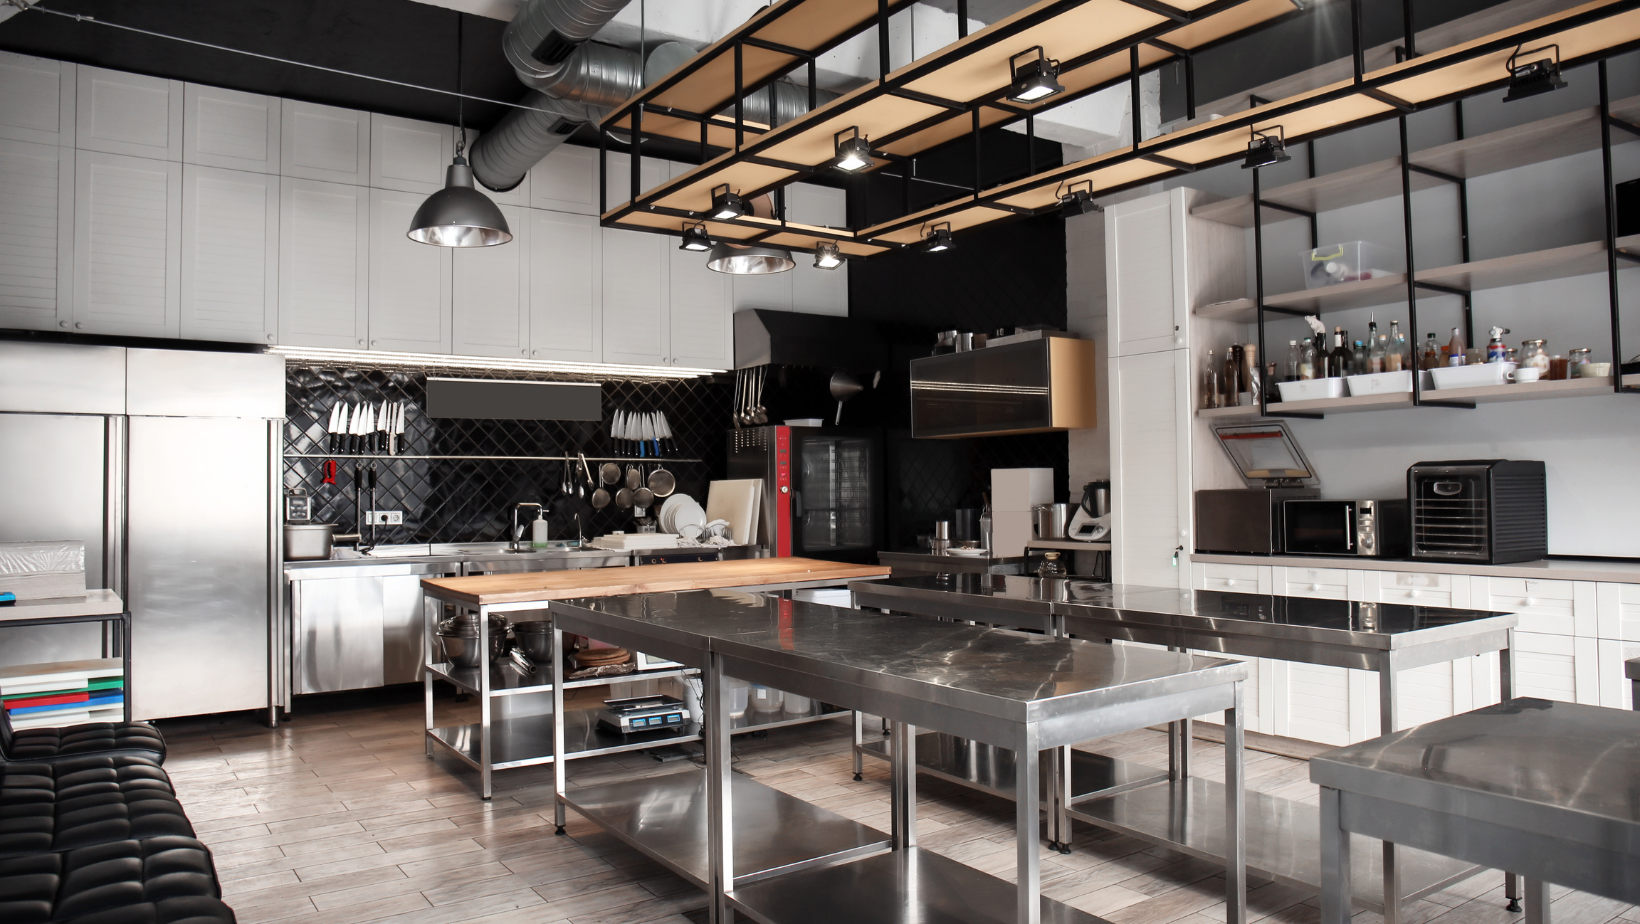 Discover top industrial kitchen design strategies to enhance efficiency and safety in your commercial cooking operations. Learn about custom layouts, equipment selection, and innovative technology integration to optimize your industrial kitchen today! 